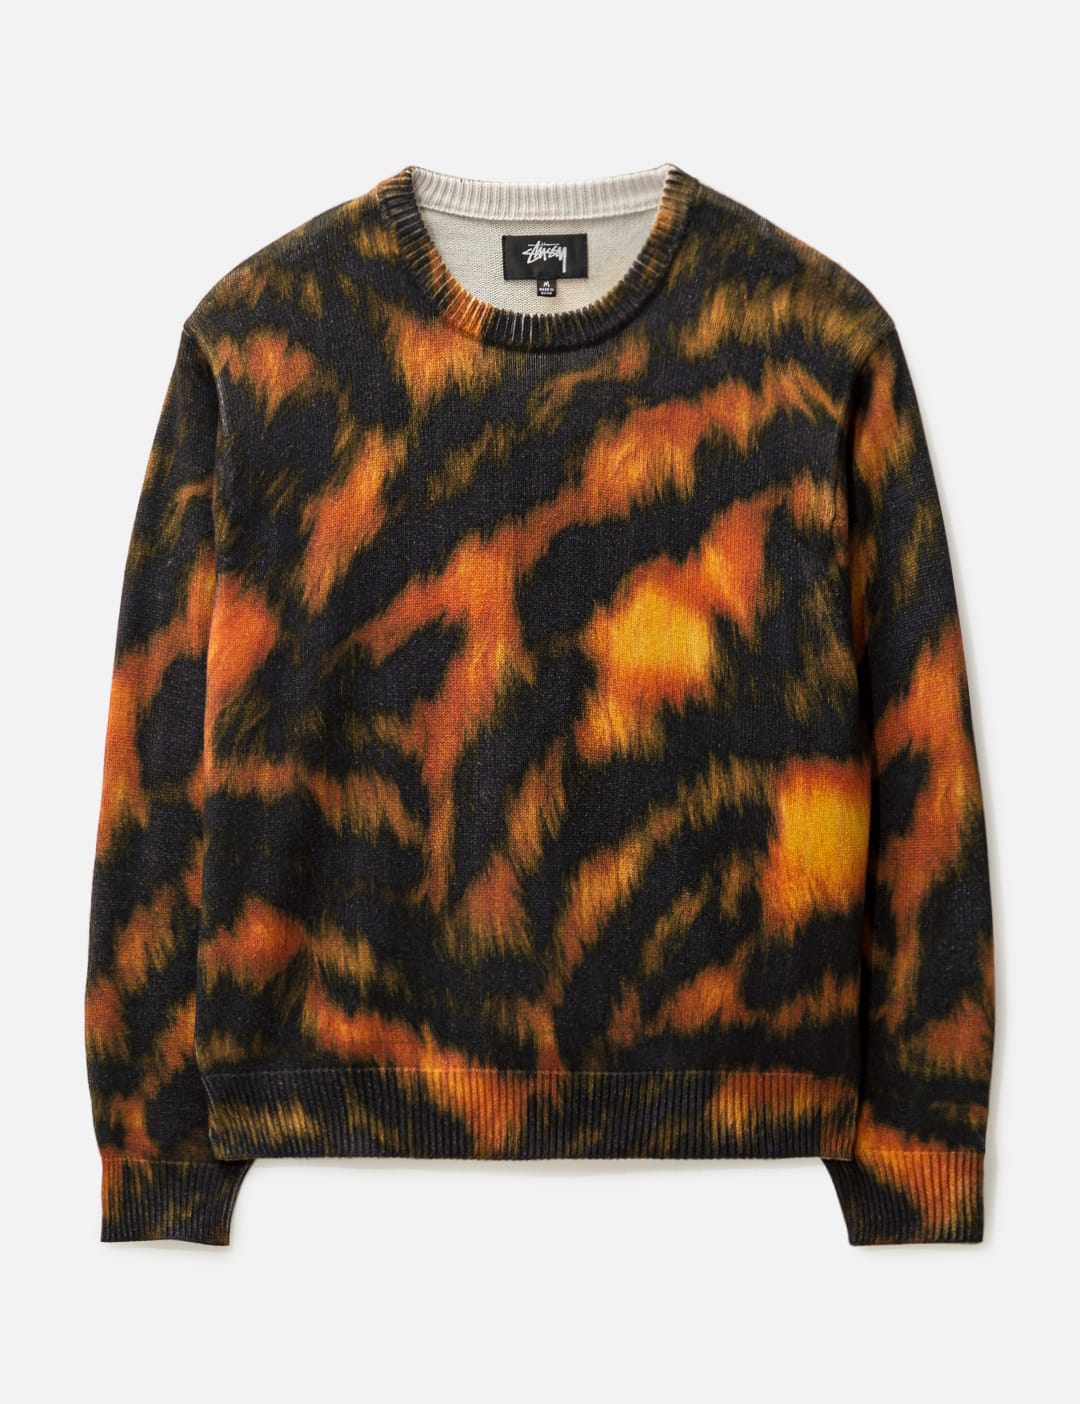 Stüssy - Printed Fur Sweater | HBX - Globally Curated Fashion and